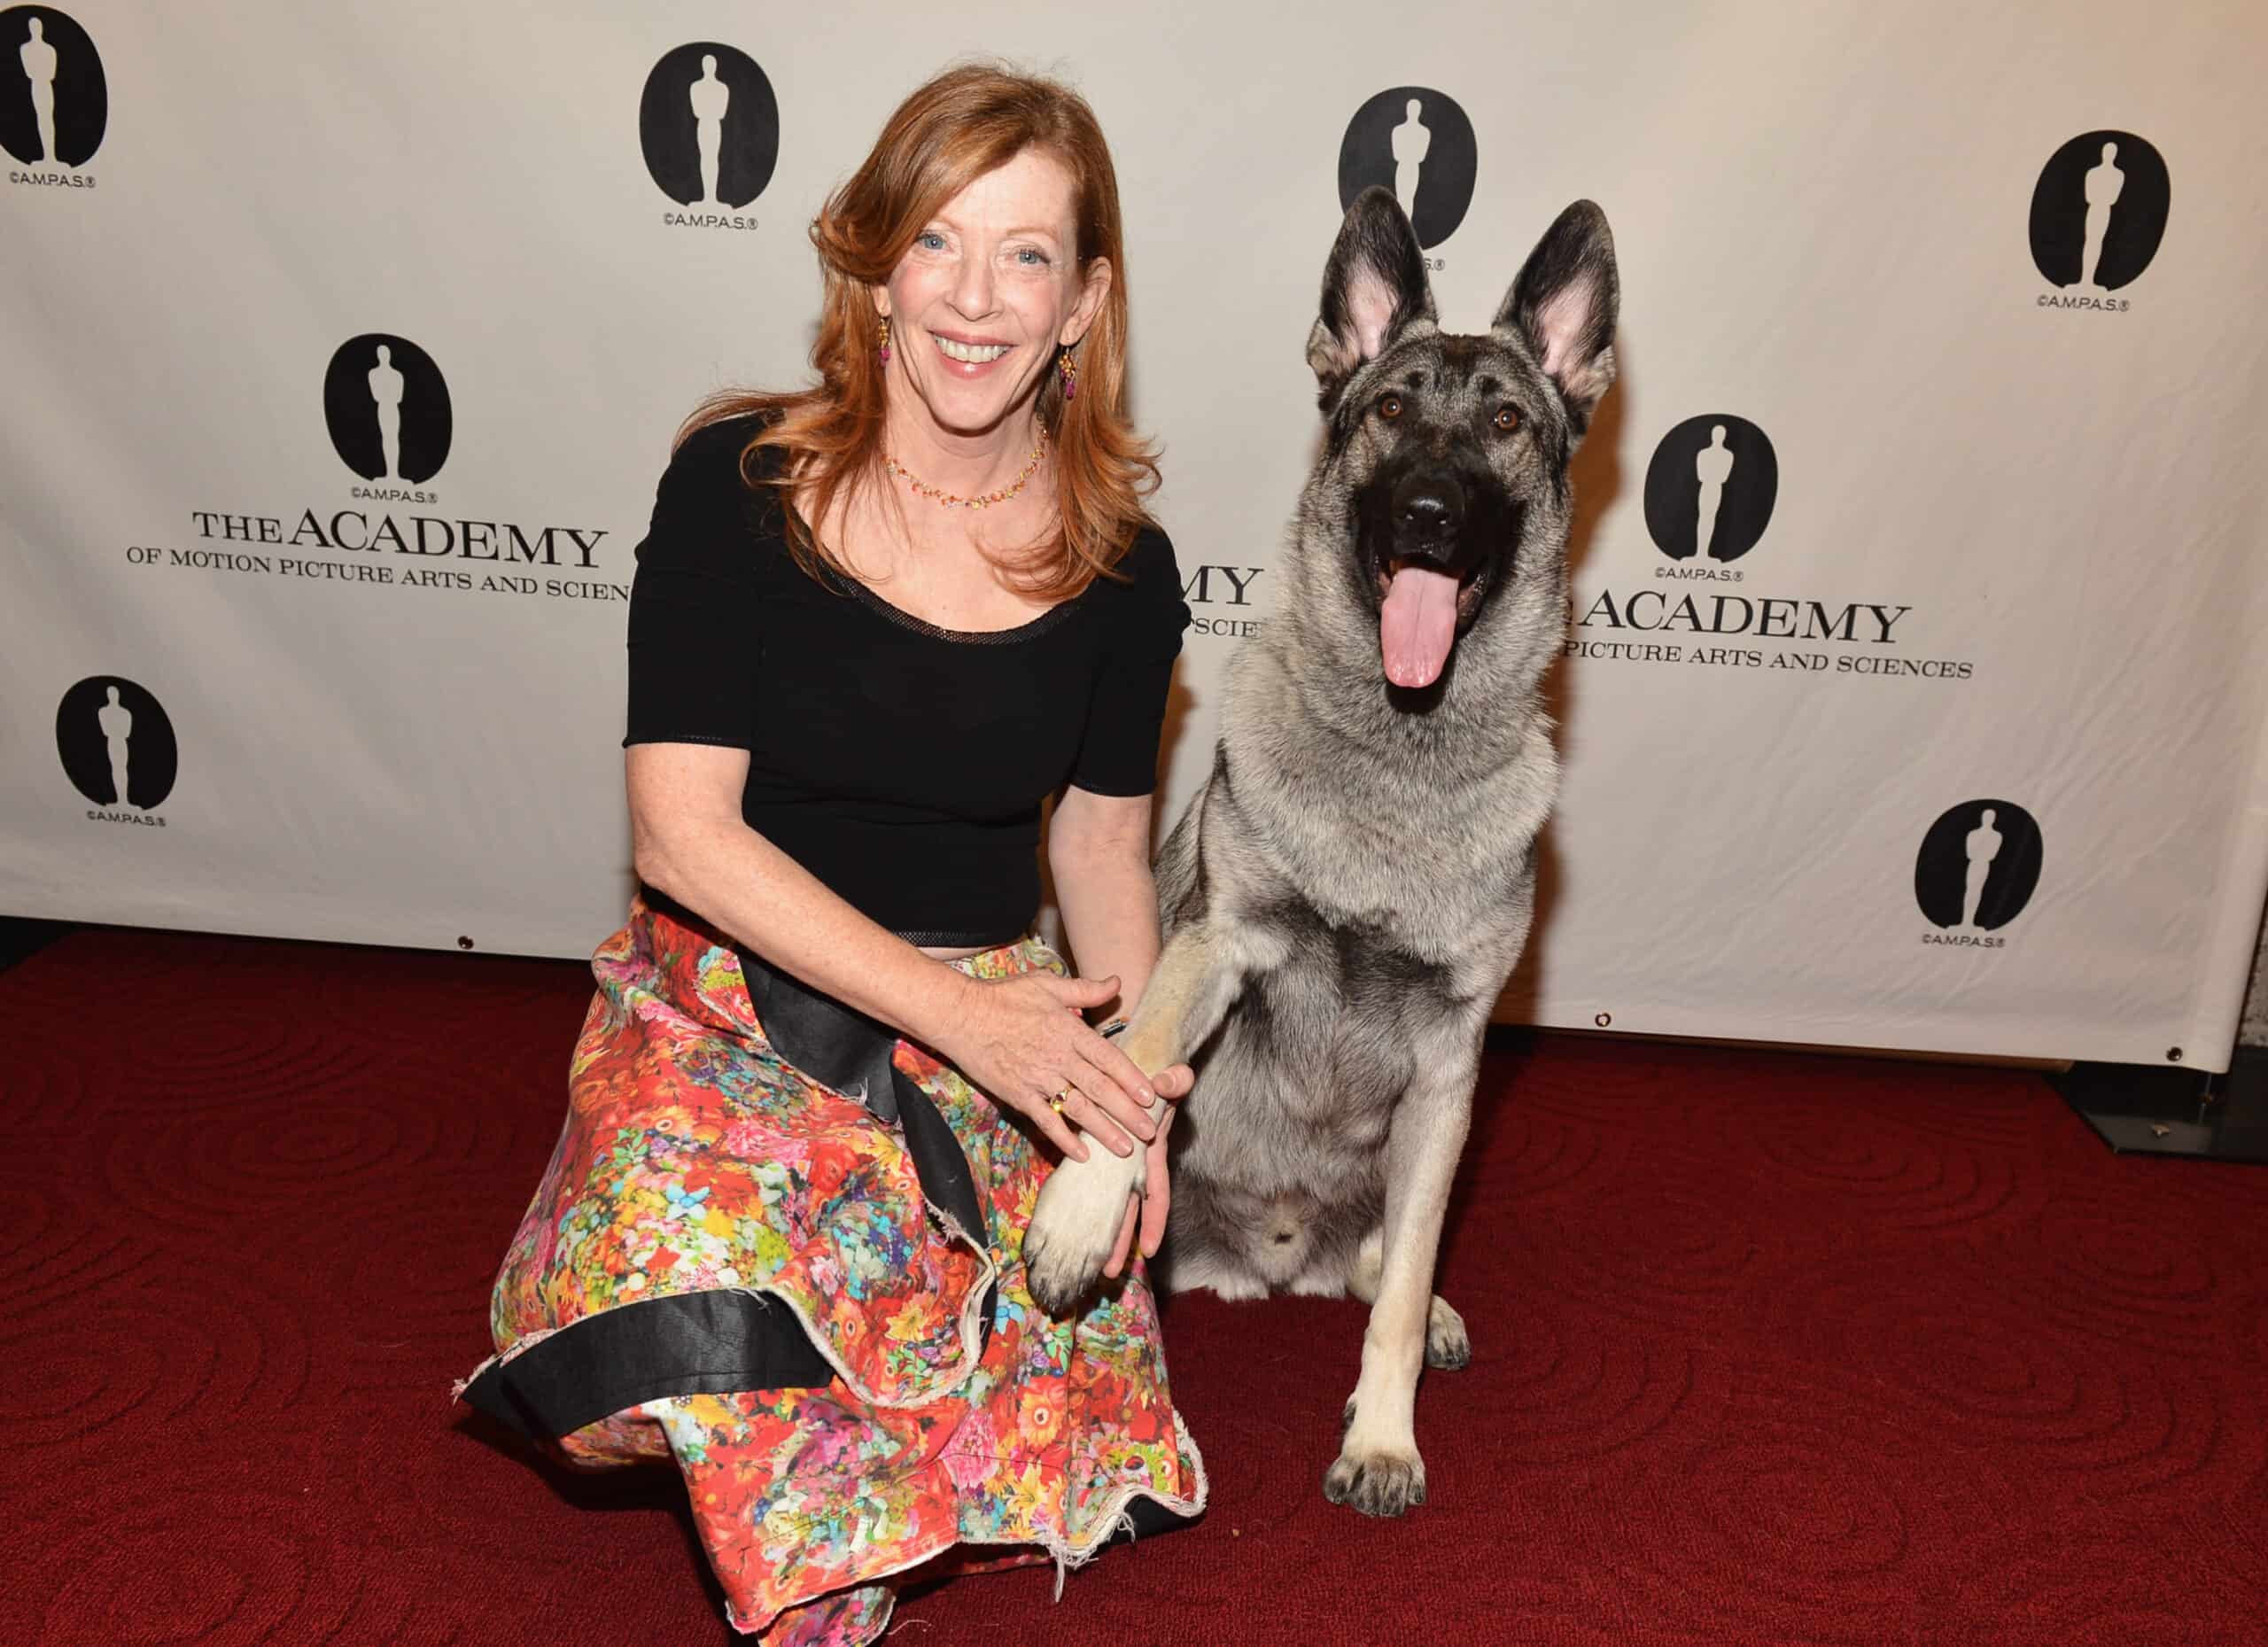 The Academy Of Motion Picture Arts And Sciences' "Hollywood Dogs: From Rin Tin Tin To Uggie"